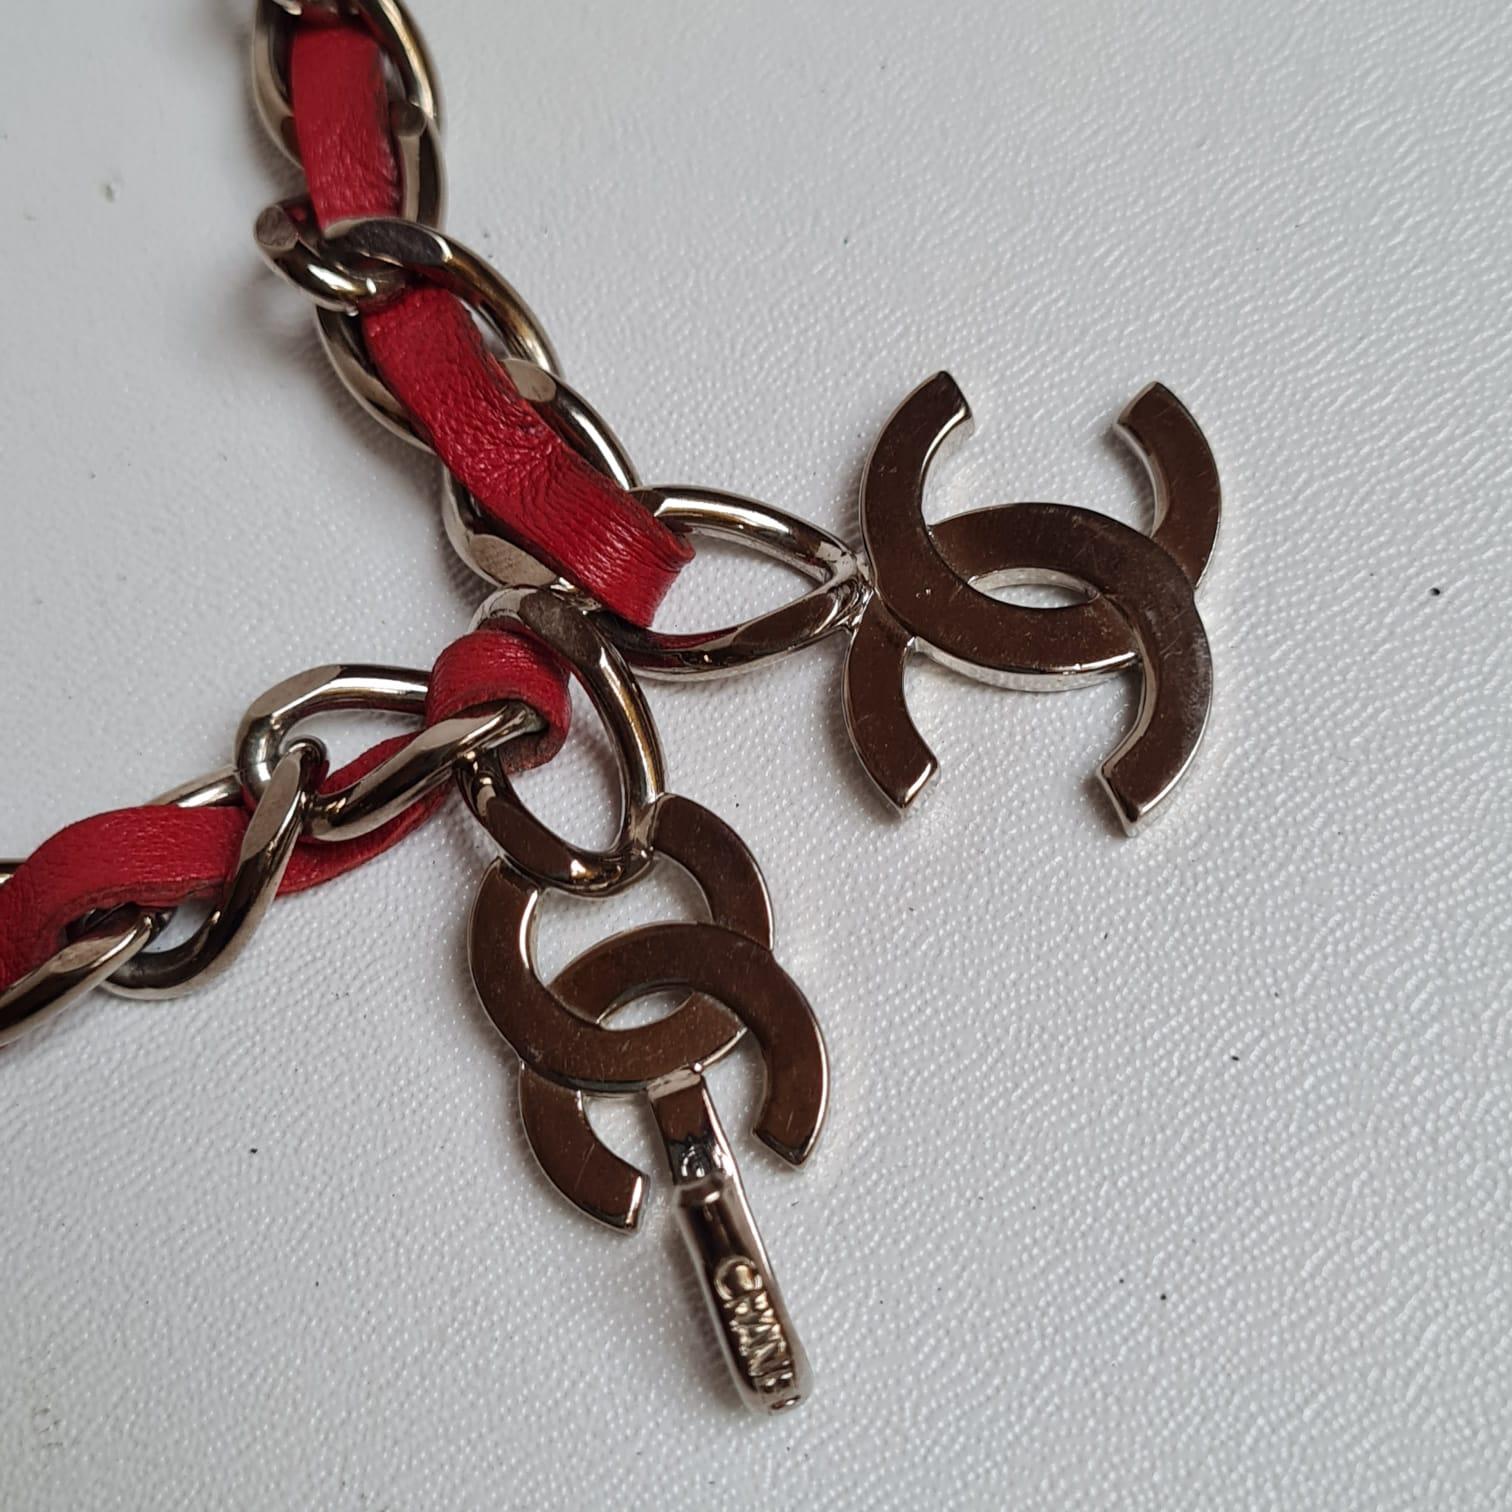 Beautiful single layer cc chain belt in great condition. Minor scuffs on the leather area. A lot of CC logo all around. Can be worn as necklace. Comes as it is. Belt length is 80 cm.